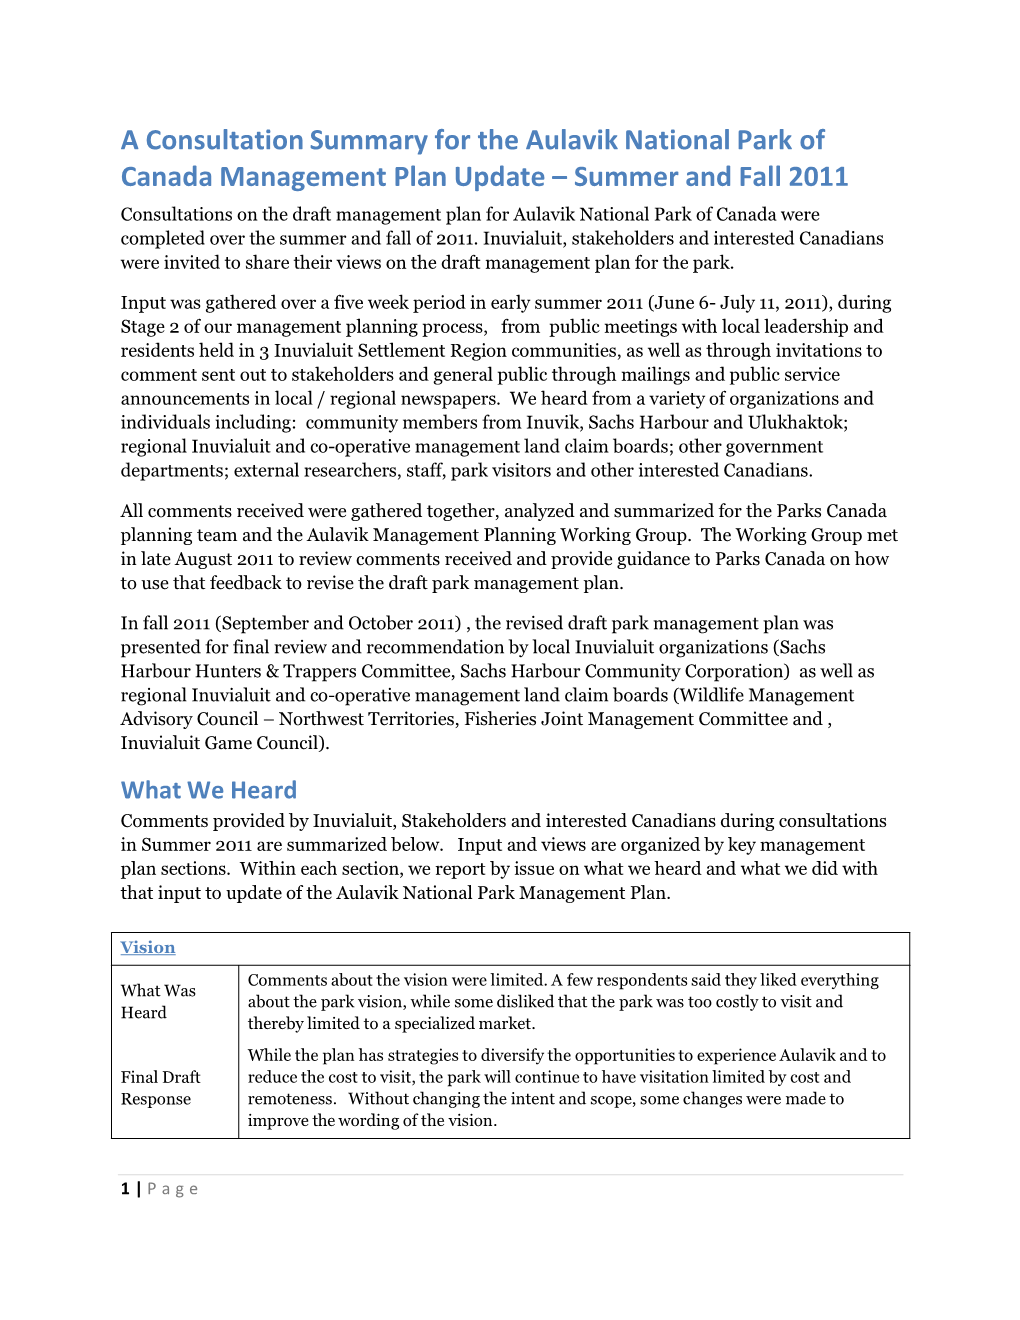 Consultation Summary for the Aulavik National Park of Canada Management Plan Update – Summer and Fall 2011